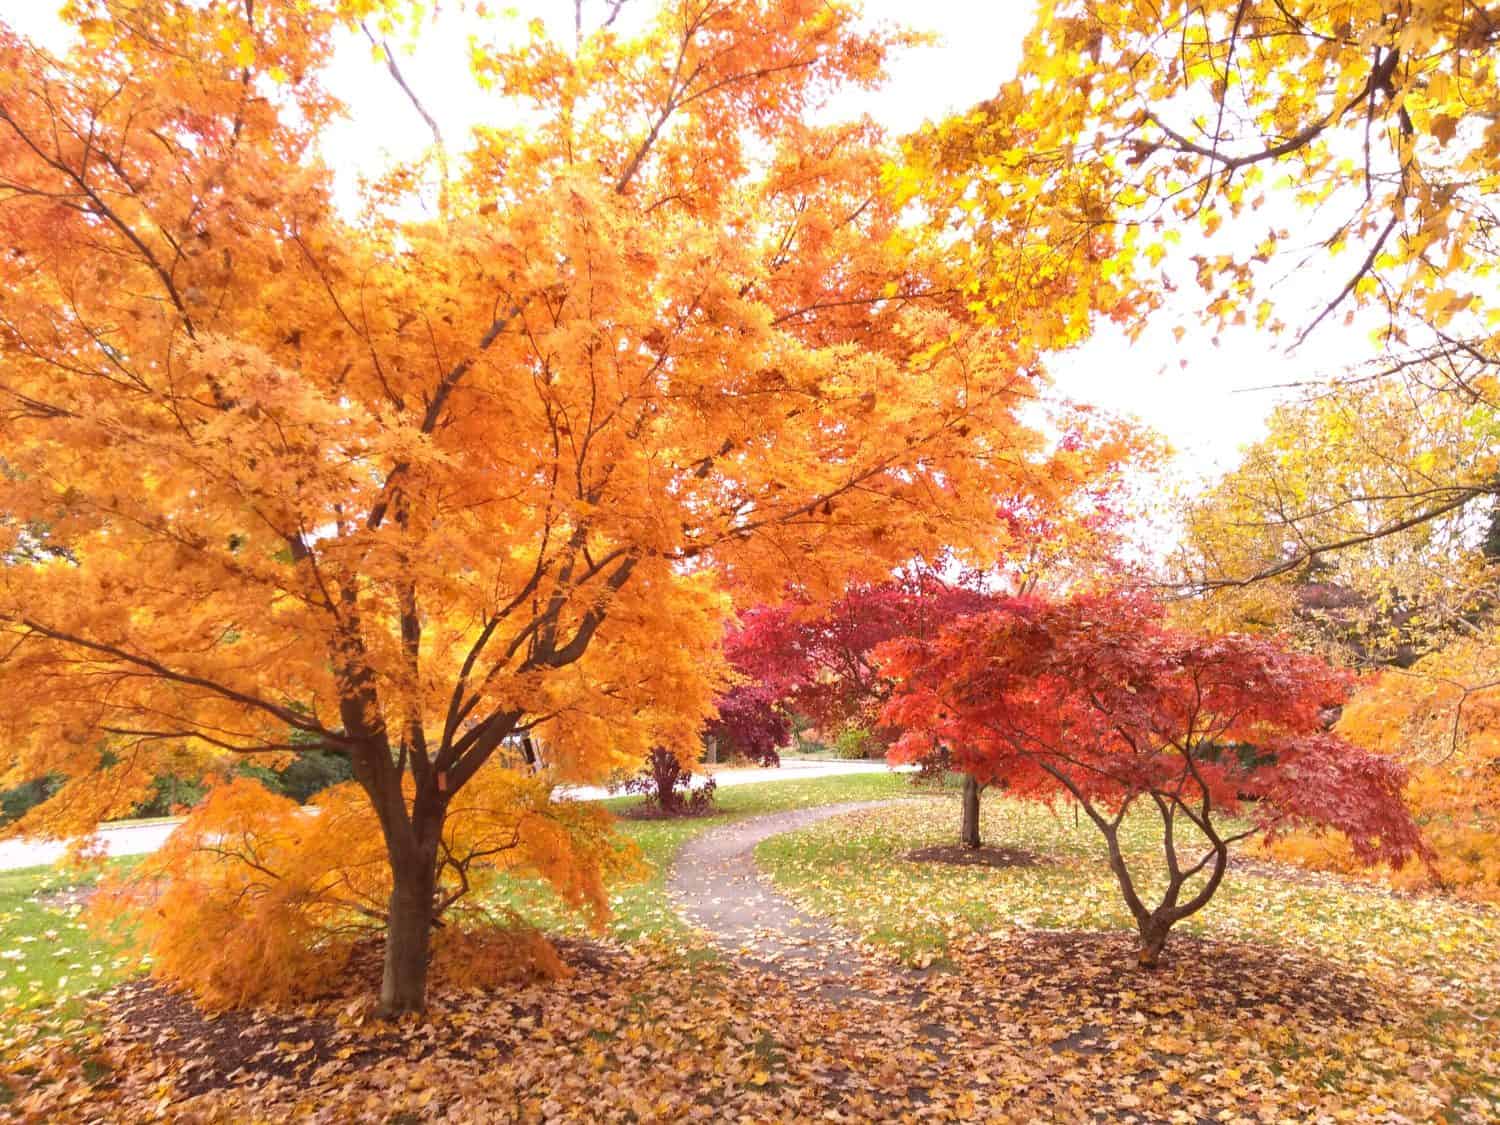 Autumn or Fall Foliage on Trees at Frelinghuysen Arboretum in New Jersey